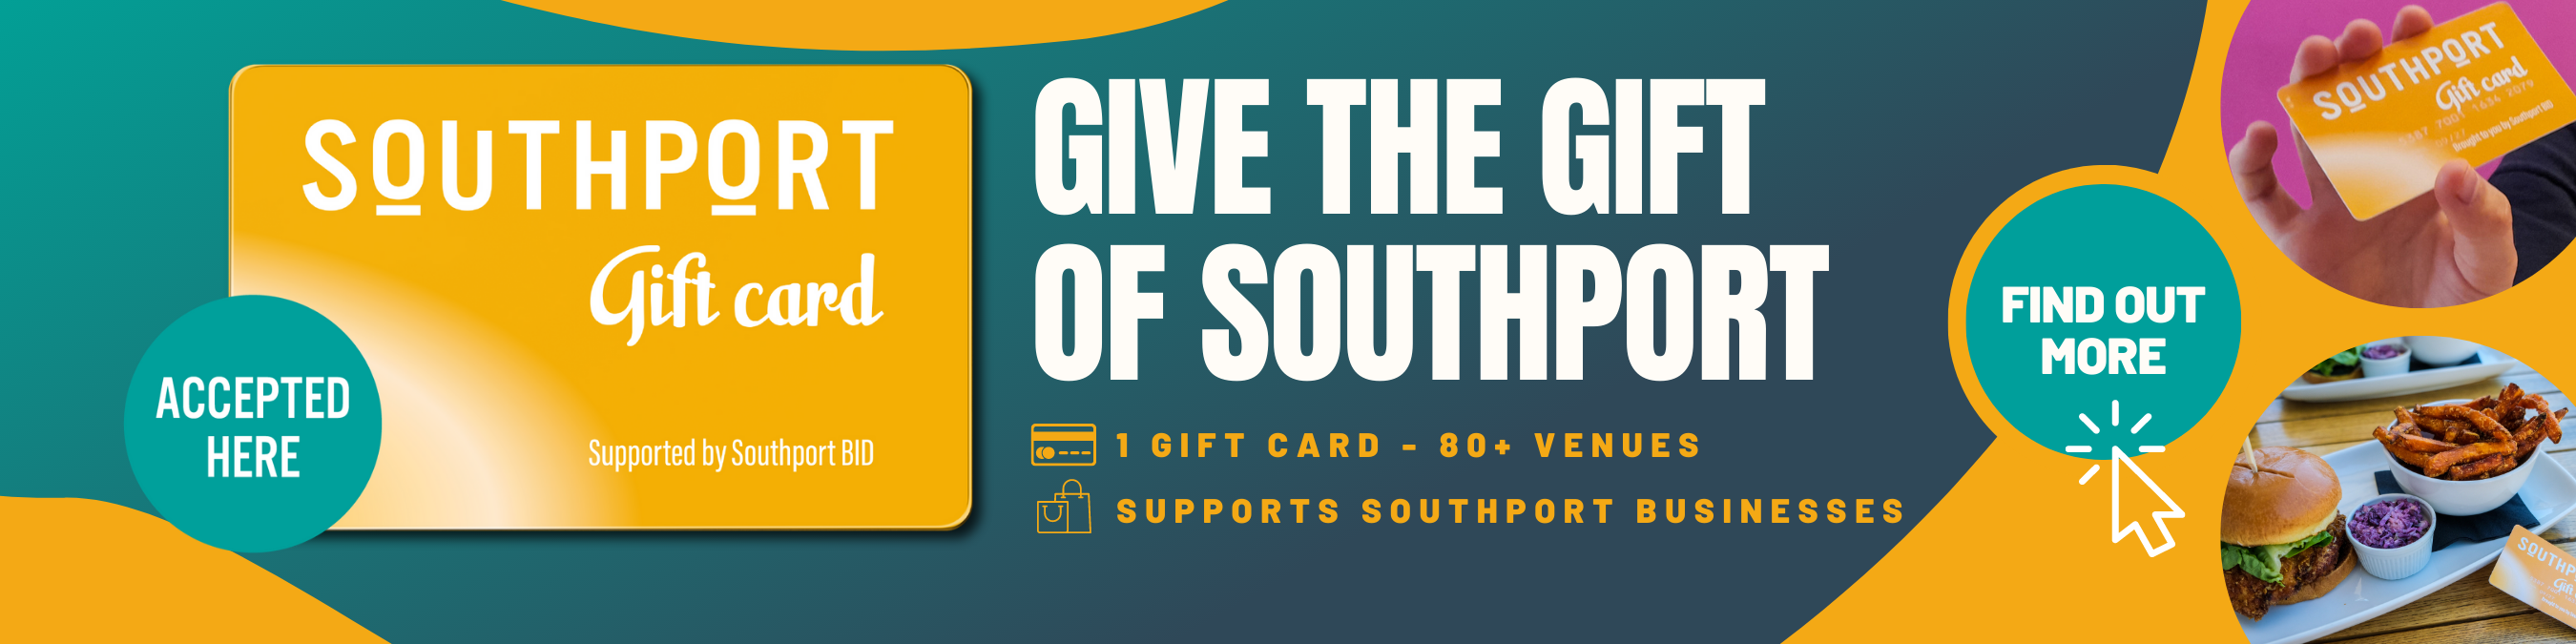 You can buy Southport Gift Card by visiting the Southport BID website here